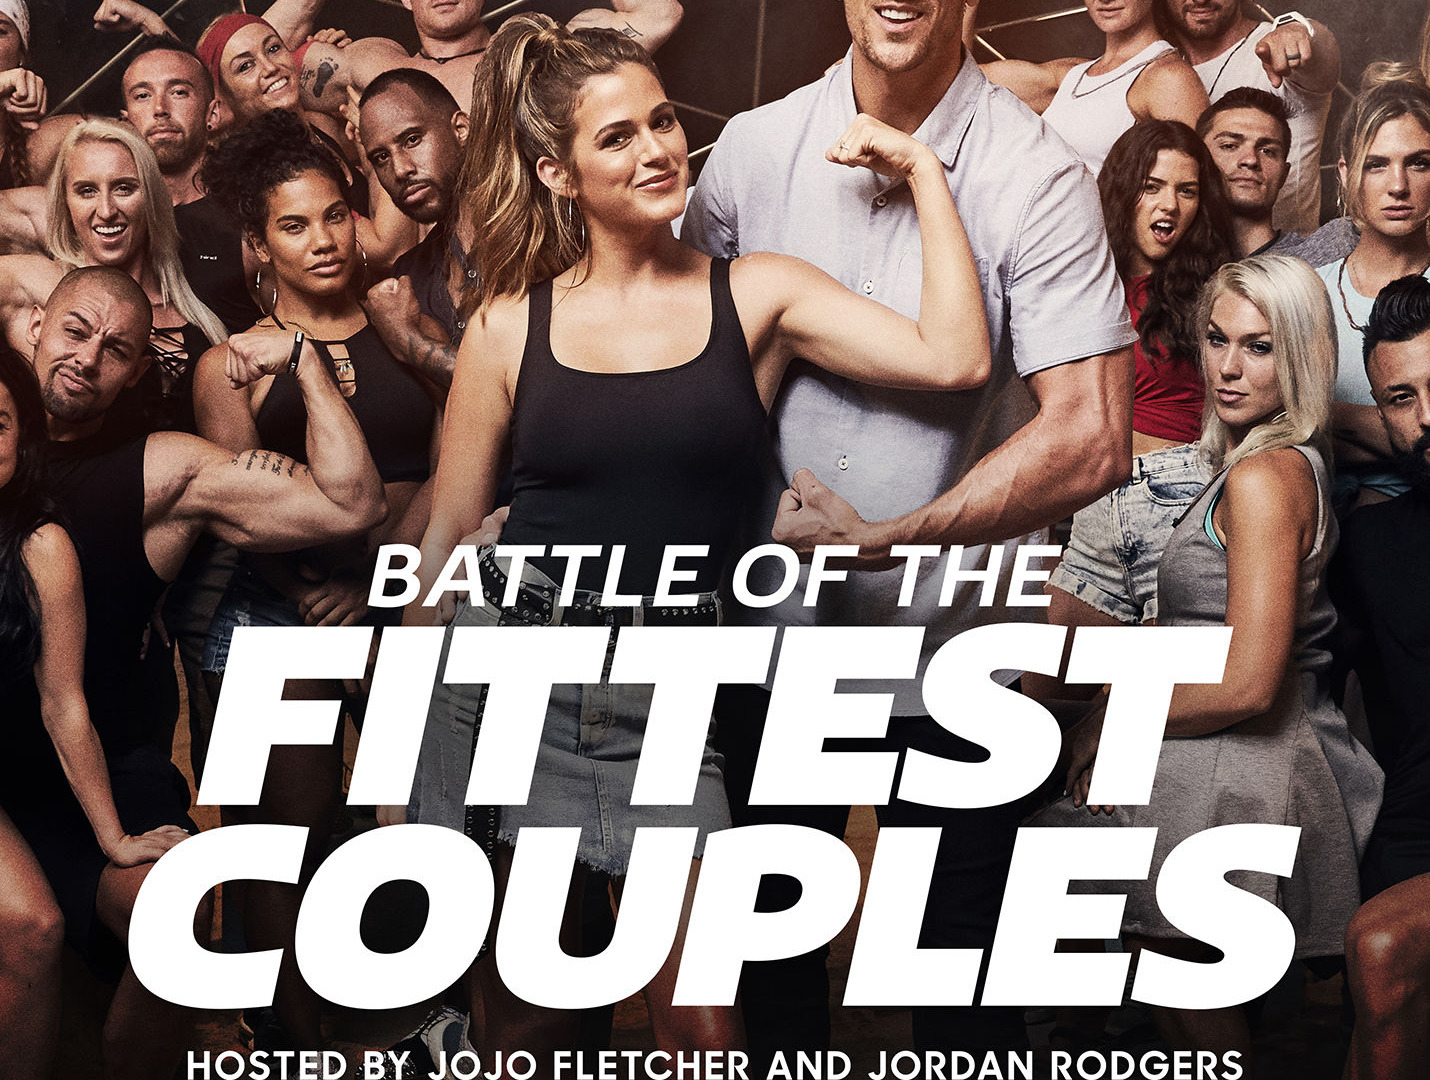 Show Battle of the Fittest Couples